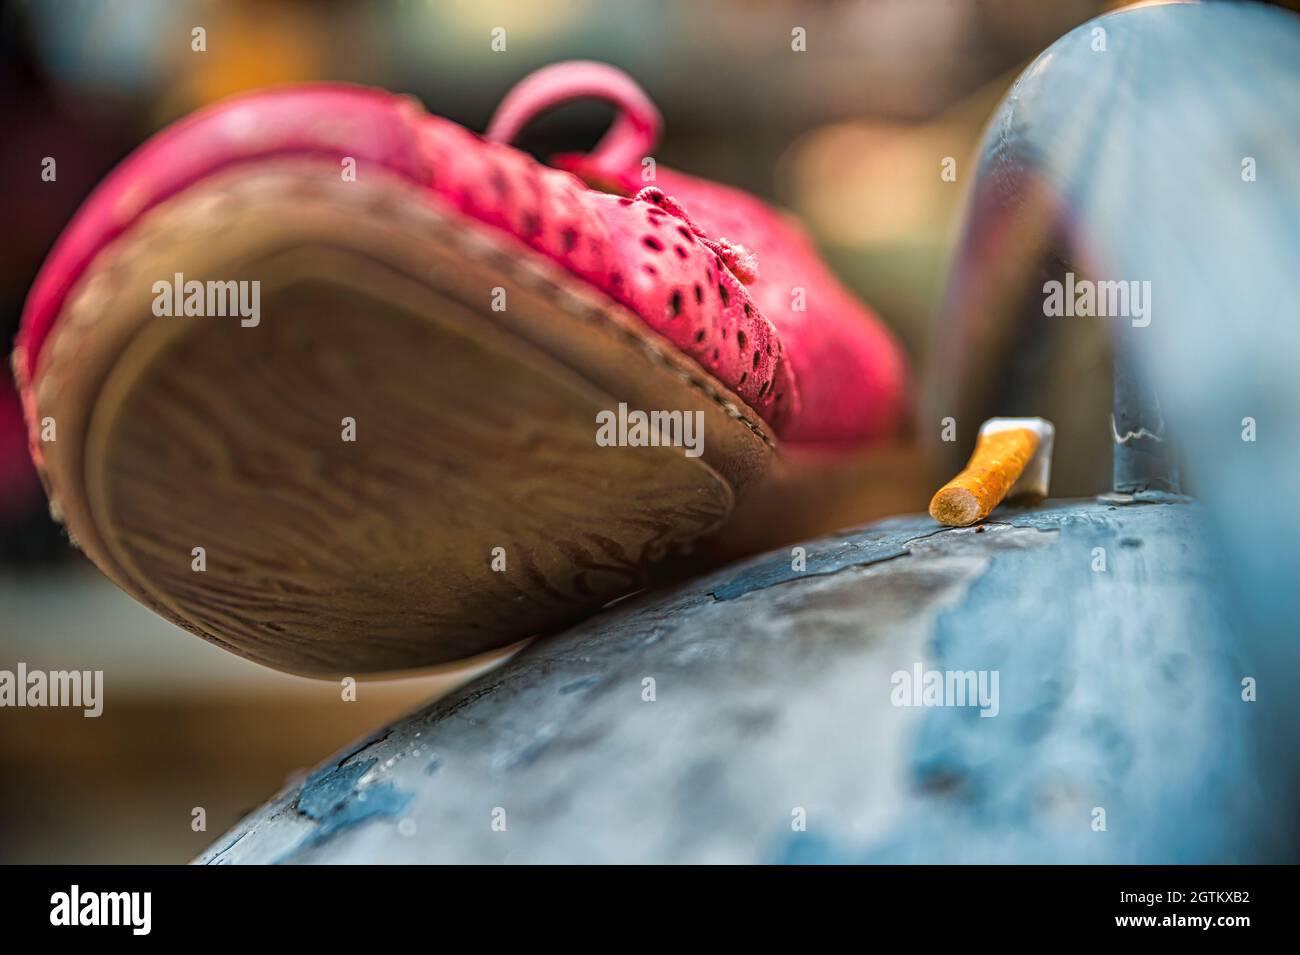 Old Shoe And Cigarette Butt On A Litter Bin Stock Photo - Alamy